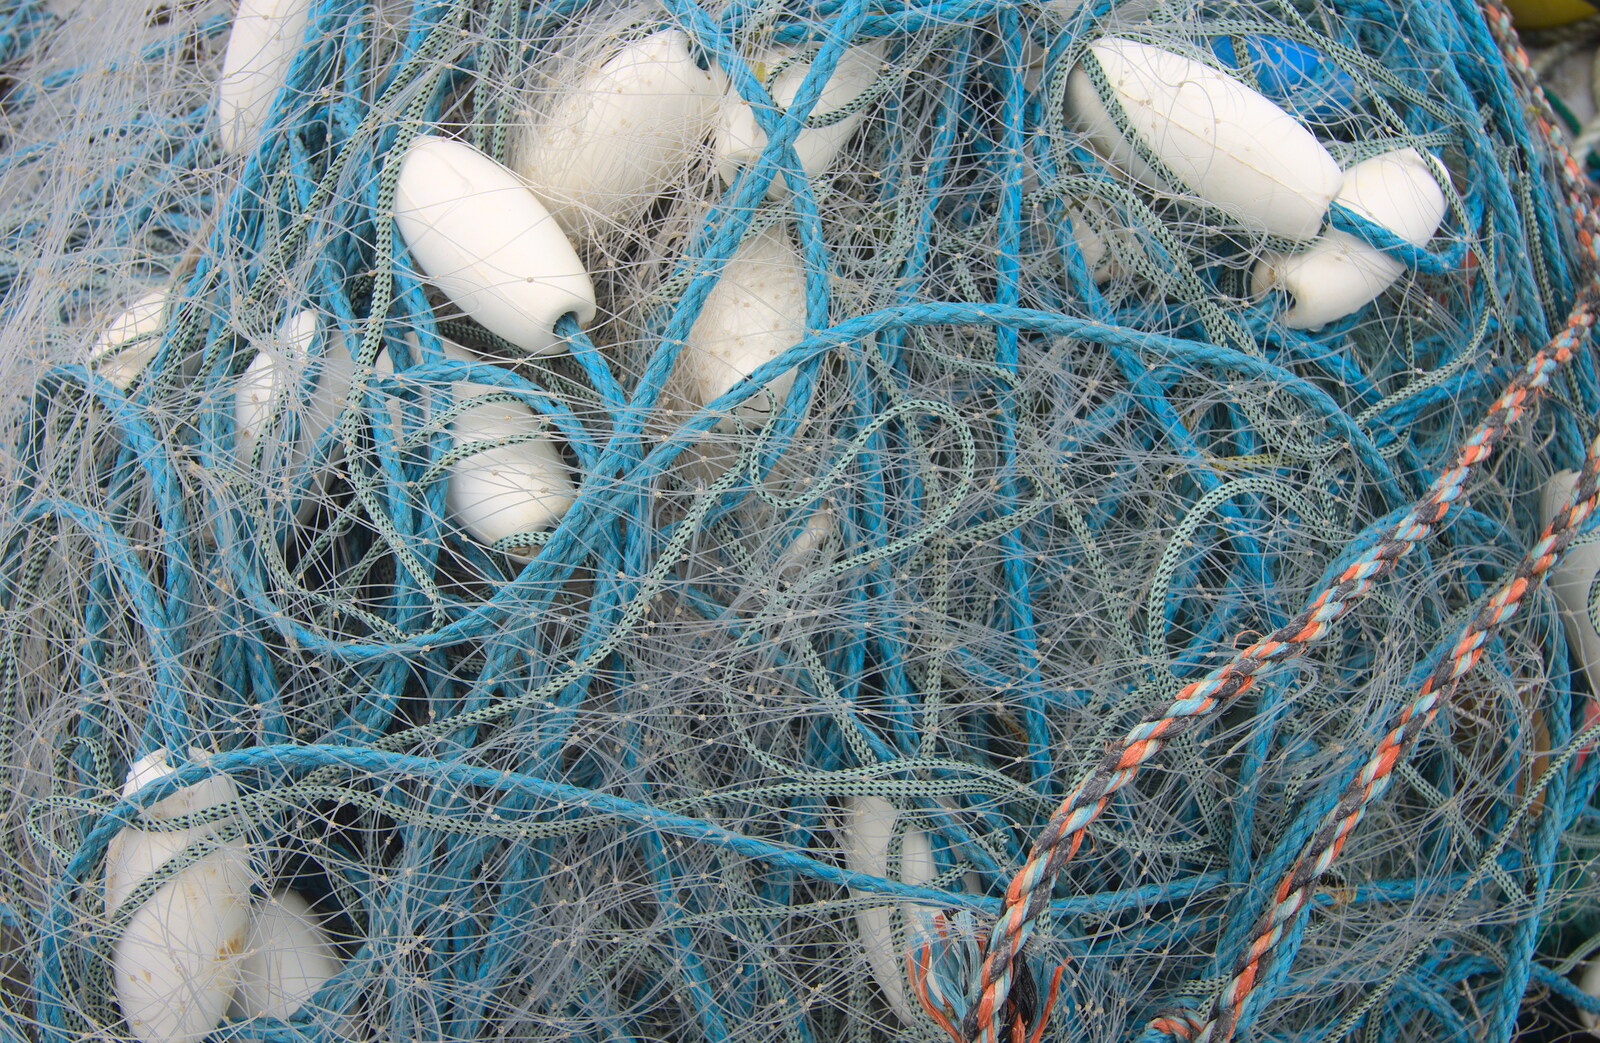 Very fine fishing nets and floats from A Visit to the Aquarium, The Barbican and Dartmoor, Plymouth, Devon - 10th June 2012